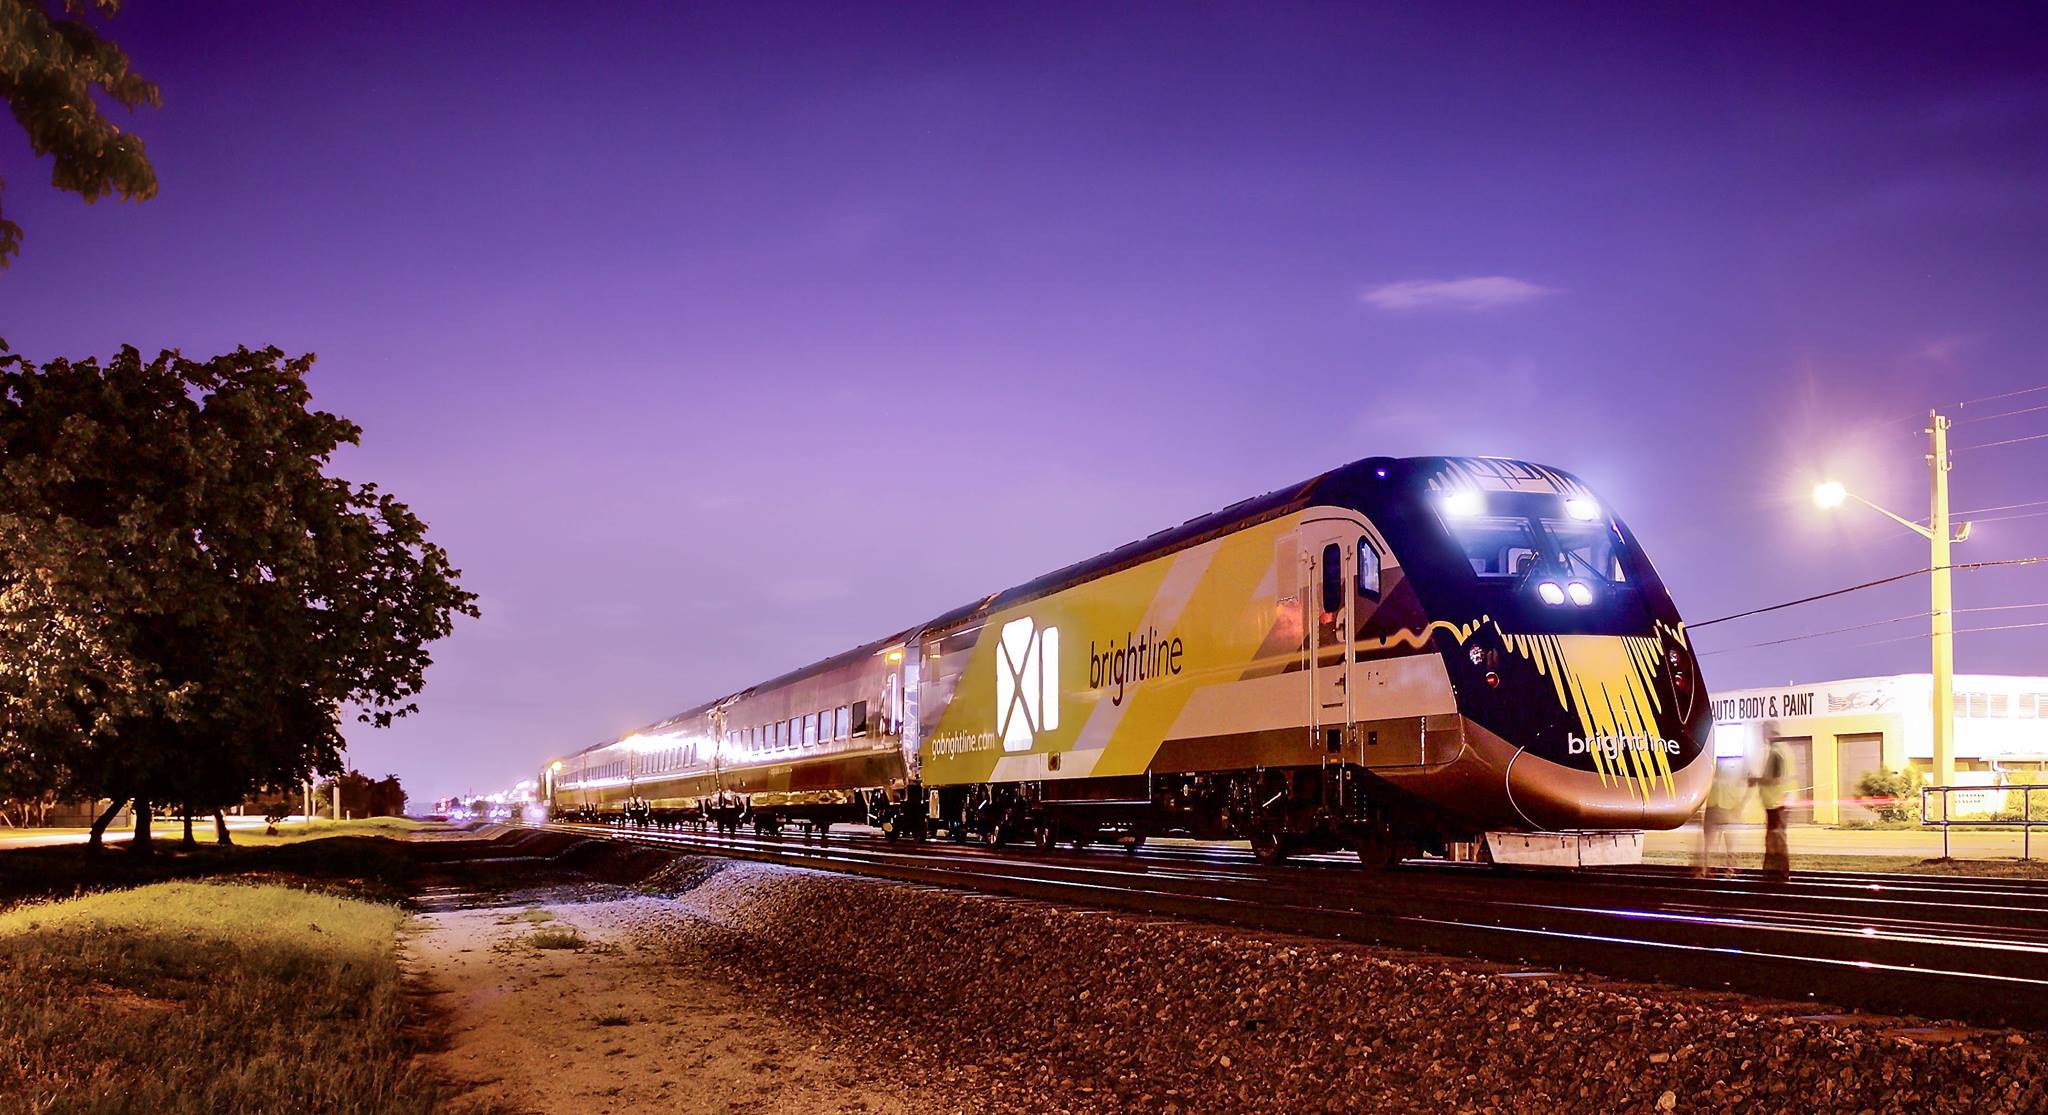 Tickets are on sale for Brightline trips between Orlando and South Florida